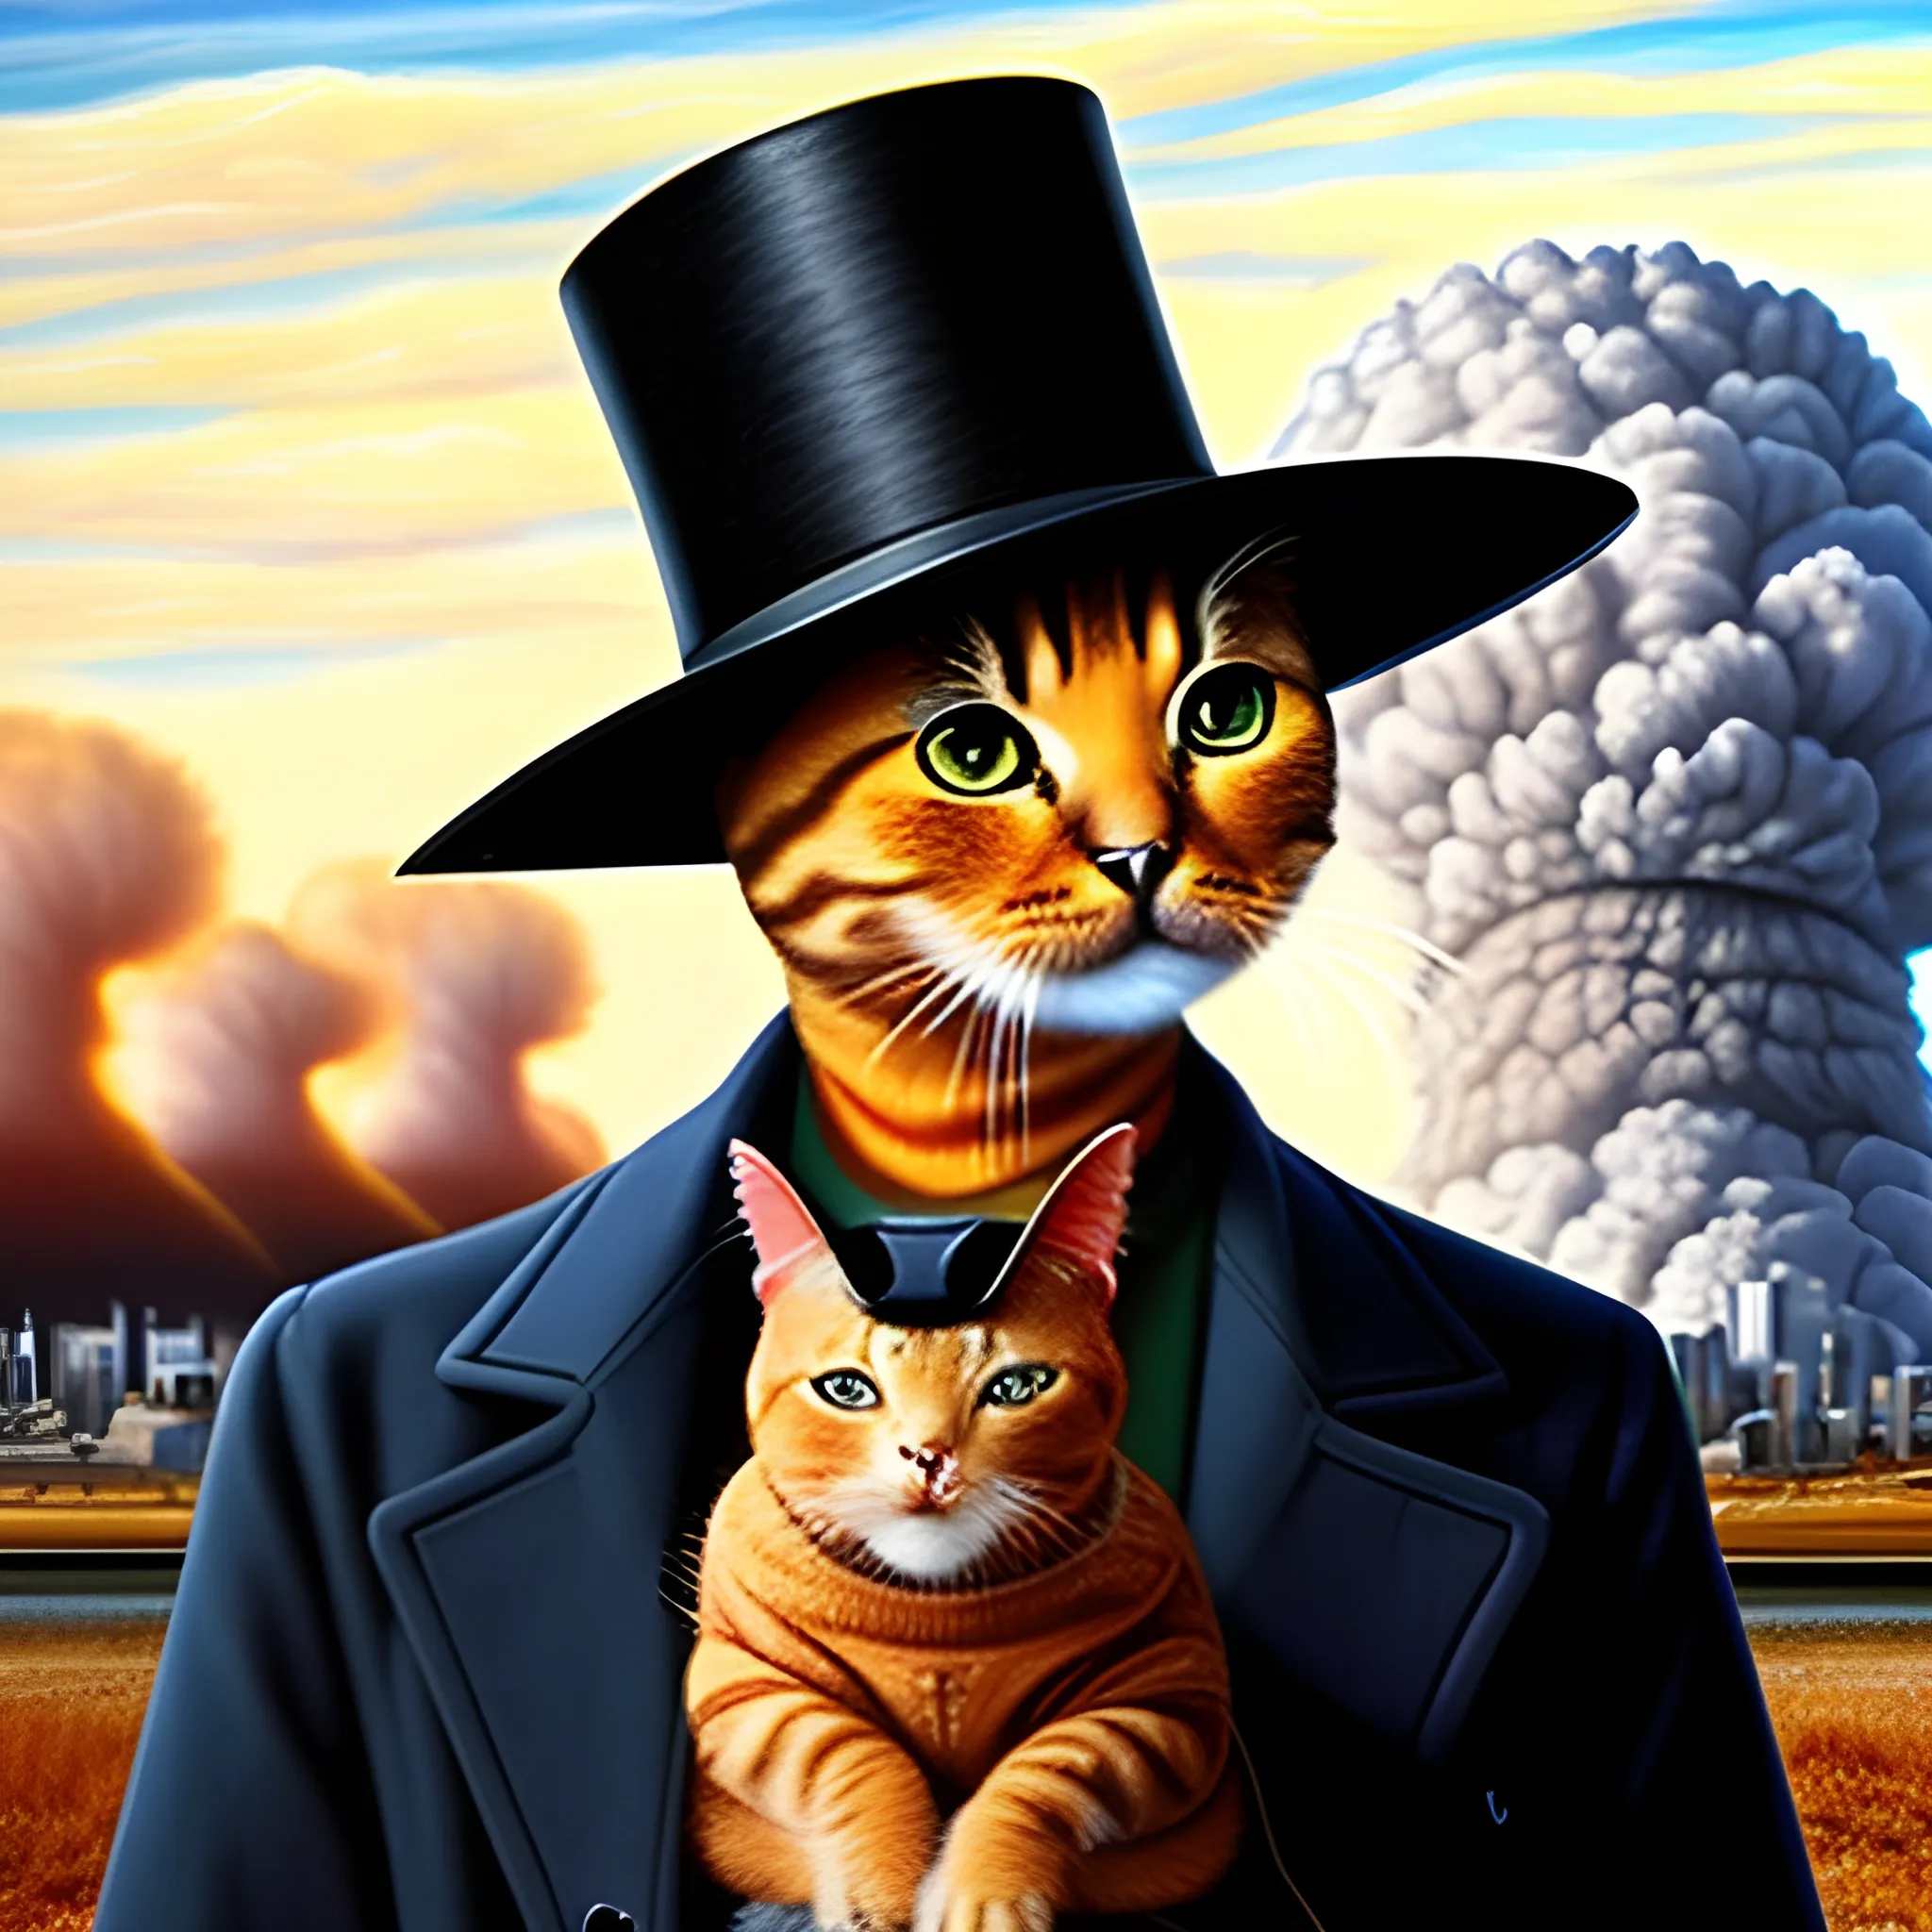 an humanoid cat whit a coat, a nuclear explotion in the background, the cat has a hat, realistic, cinematografic ,Oil Painting